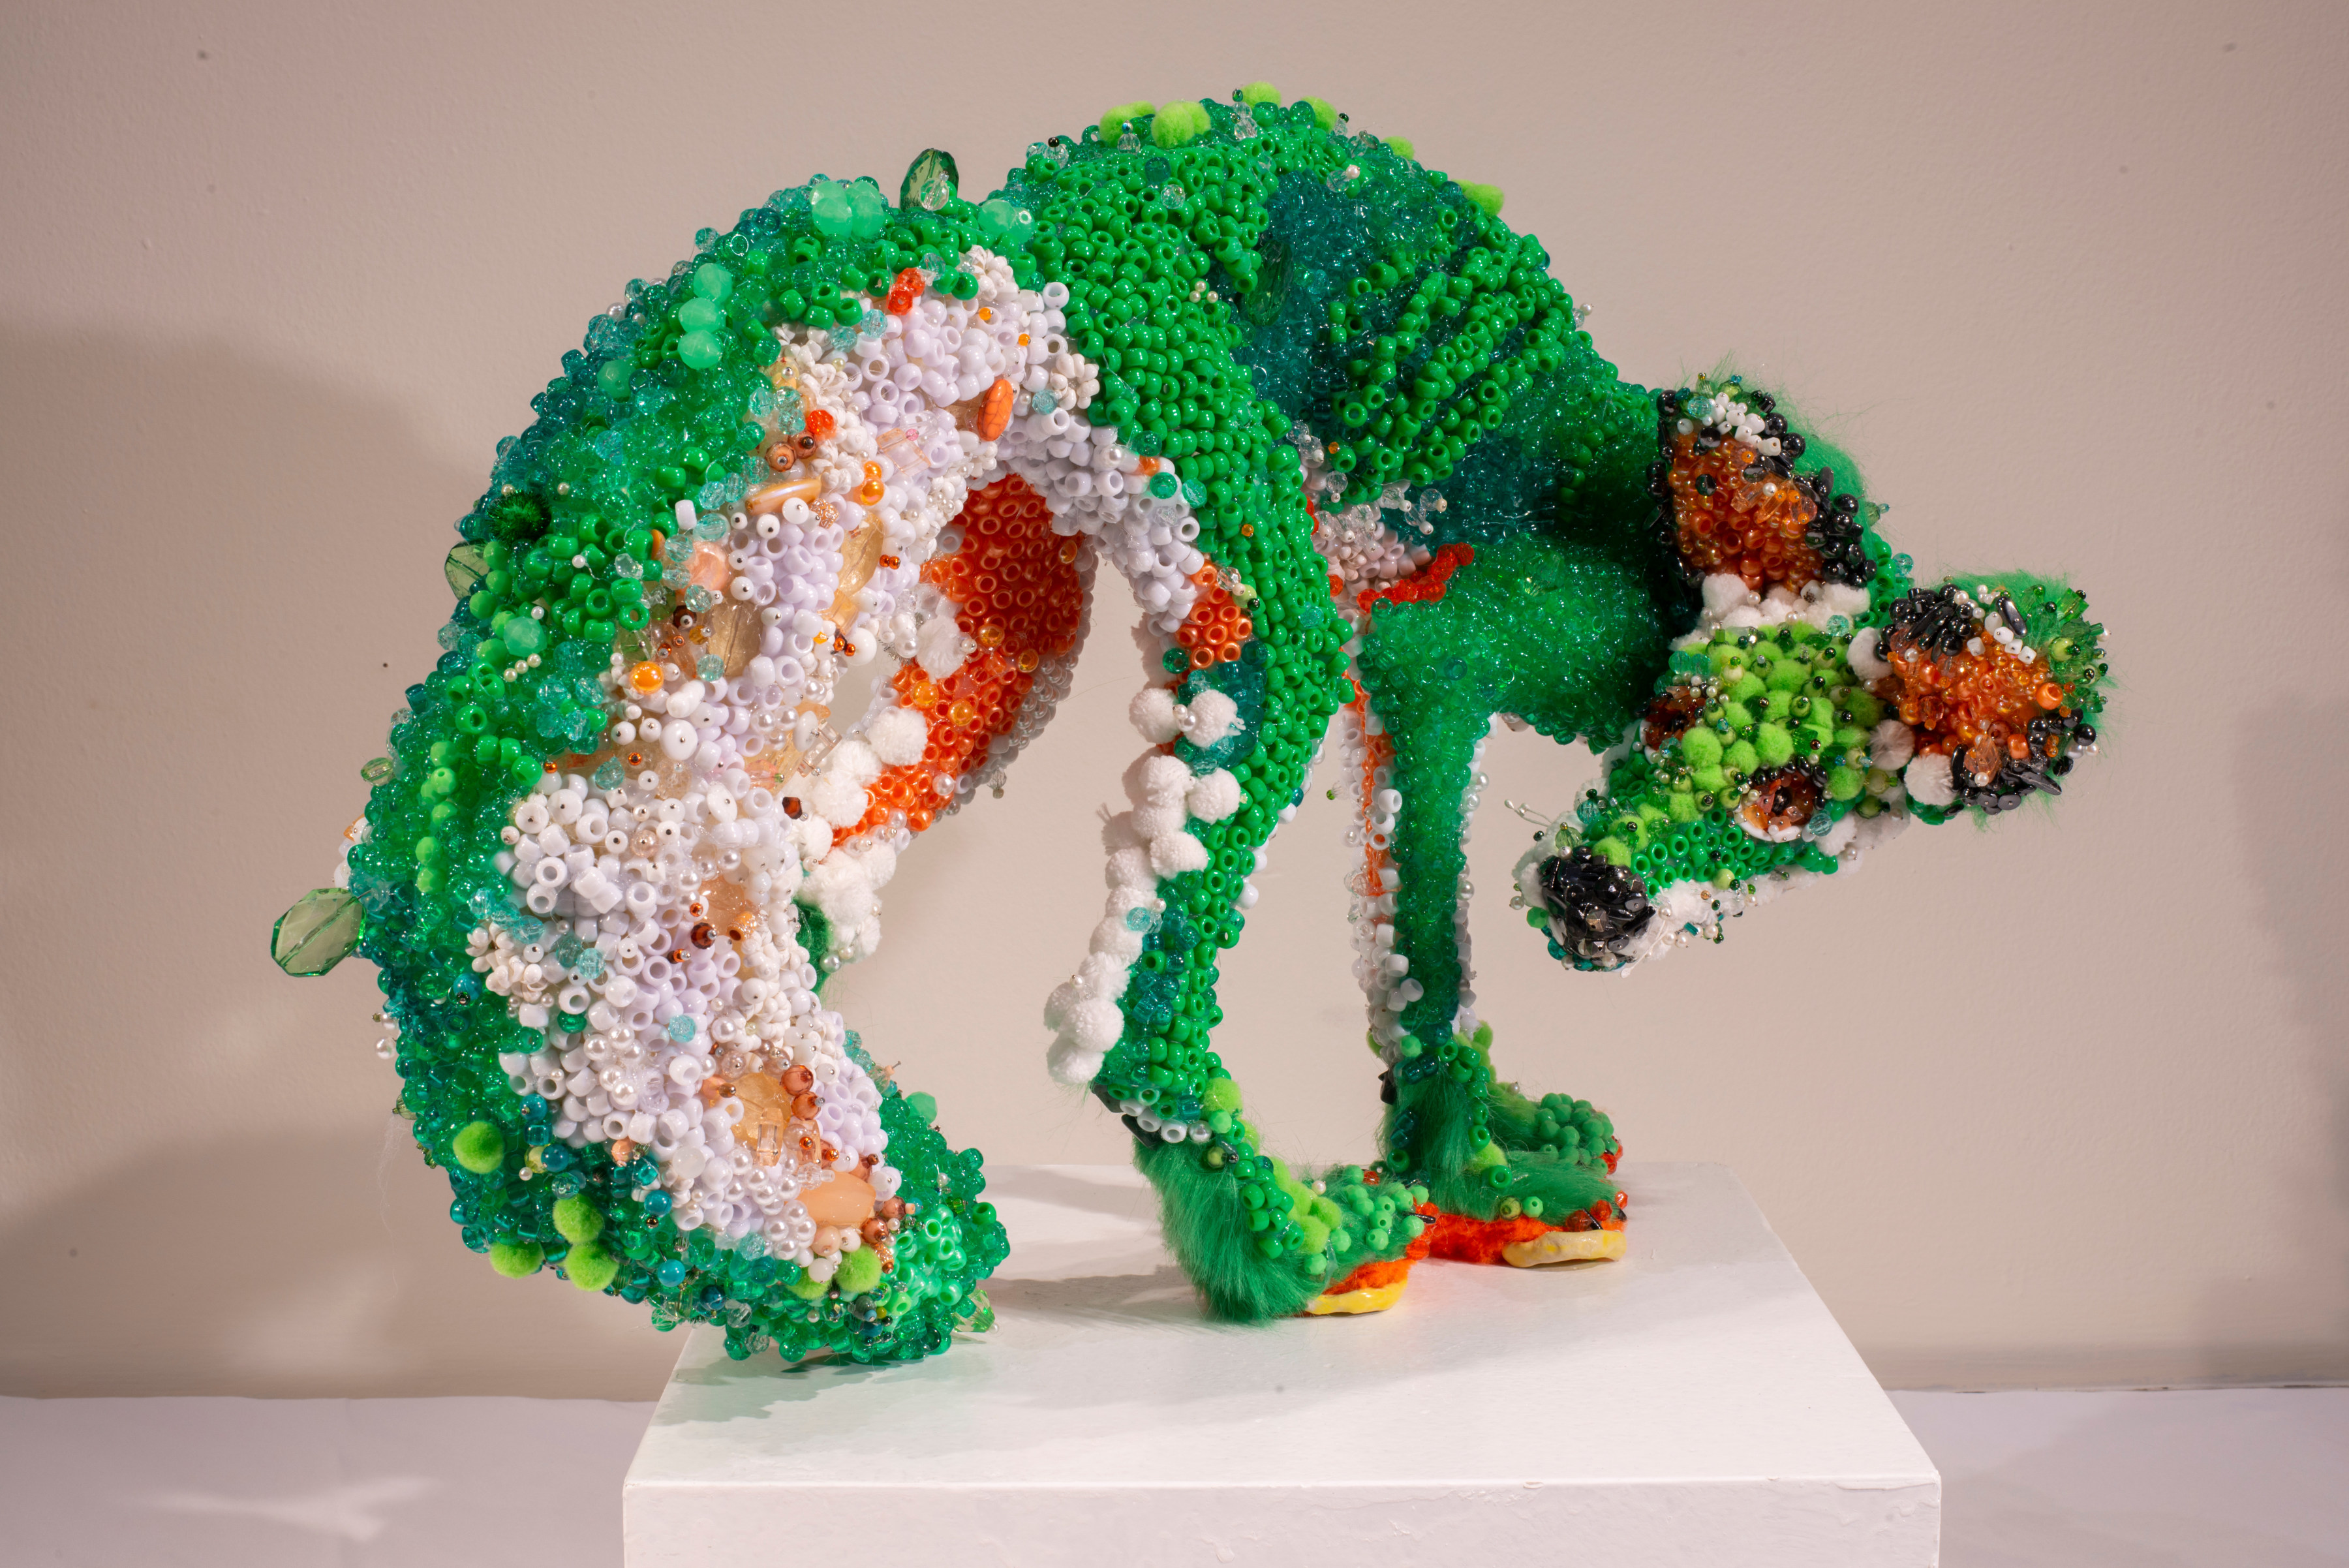 Fox sculpture covered with green, white, and orange beads and glass, glancing over its shoulder.